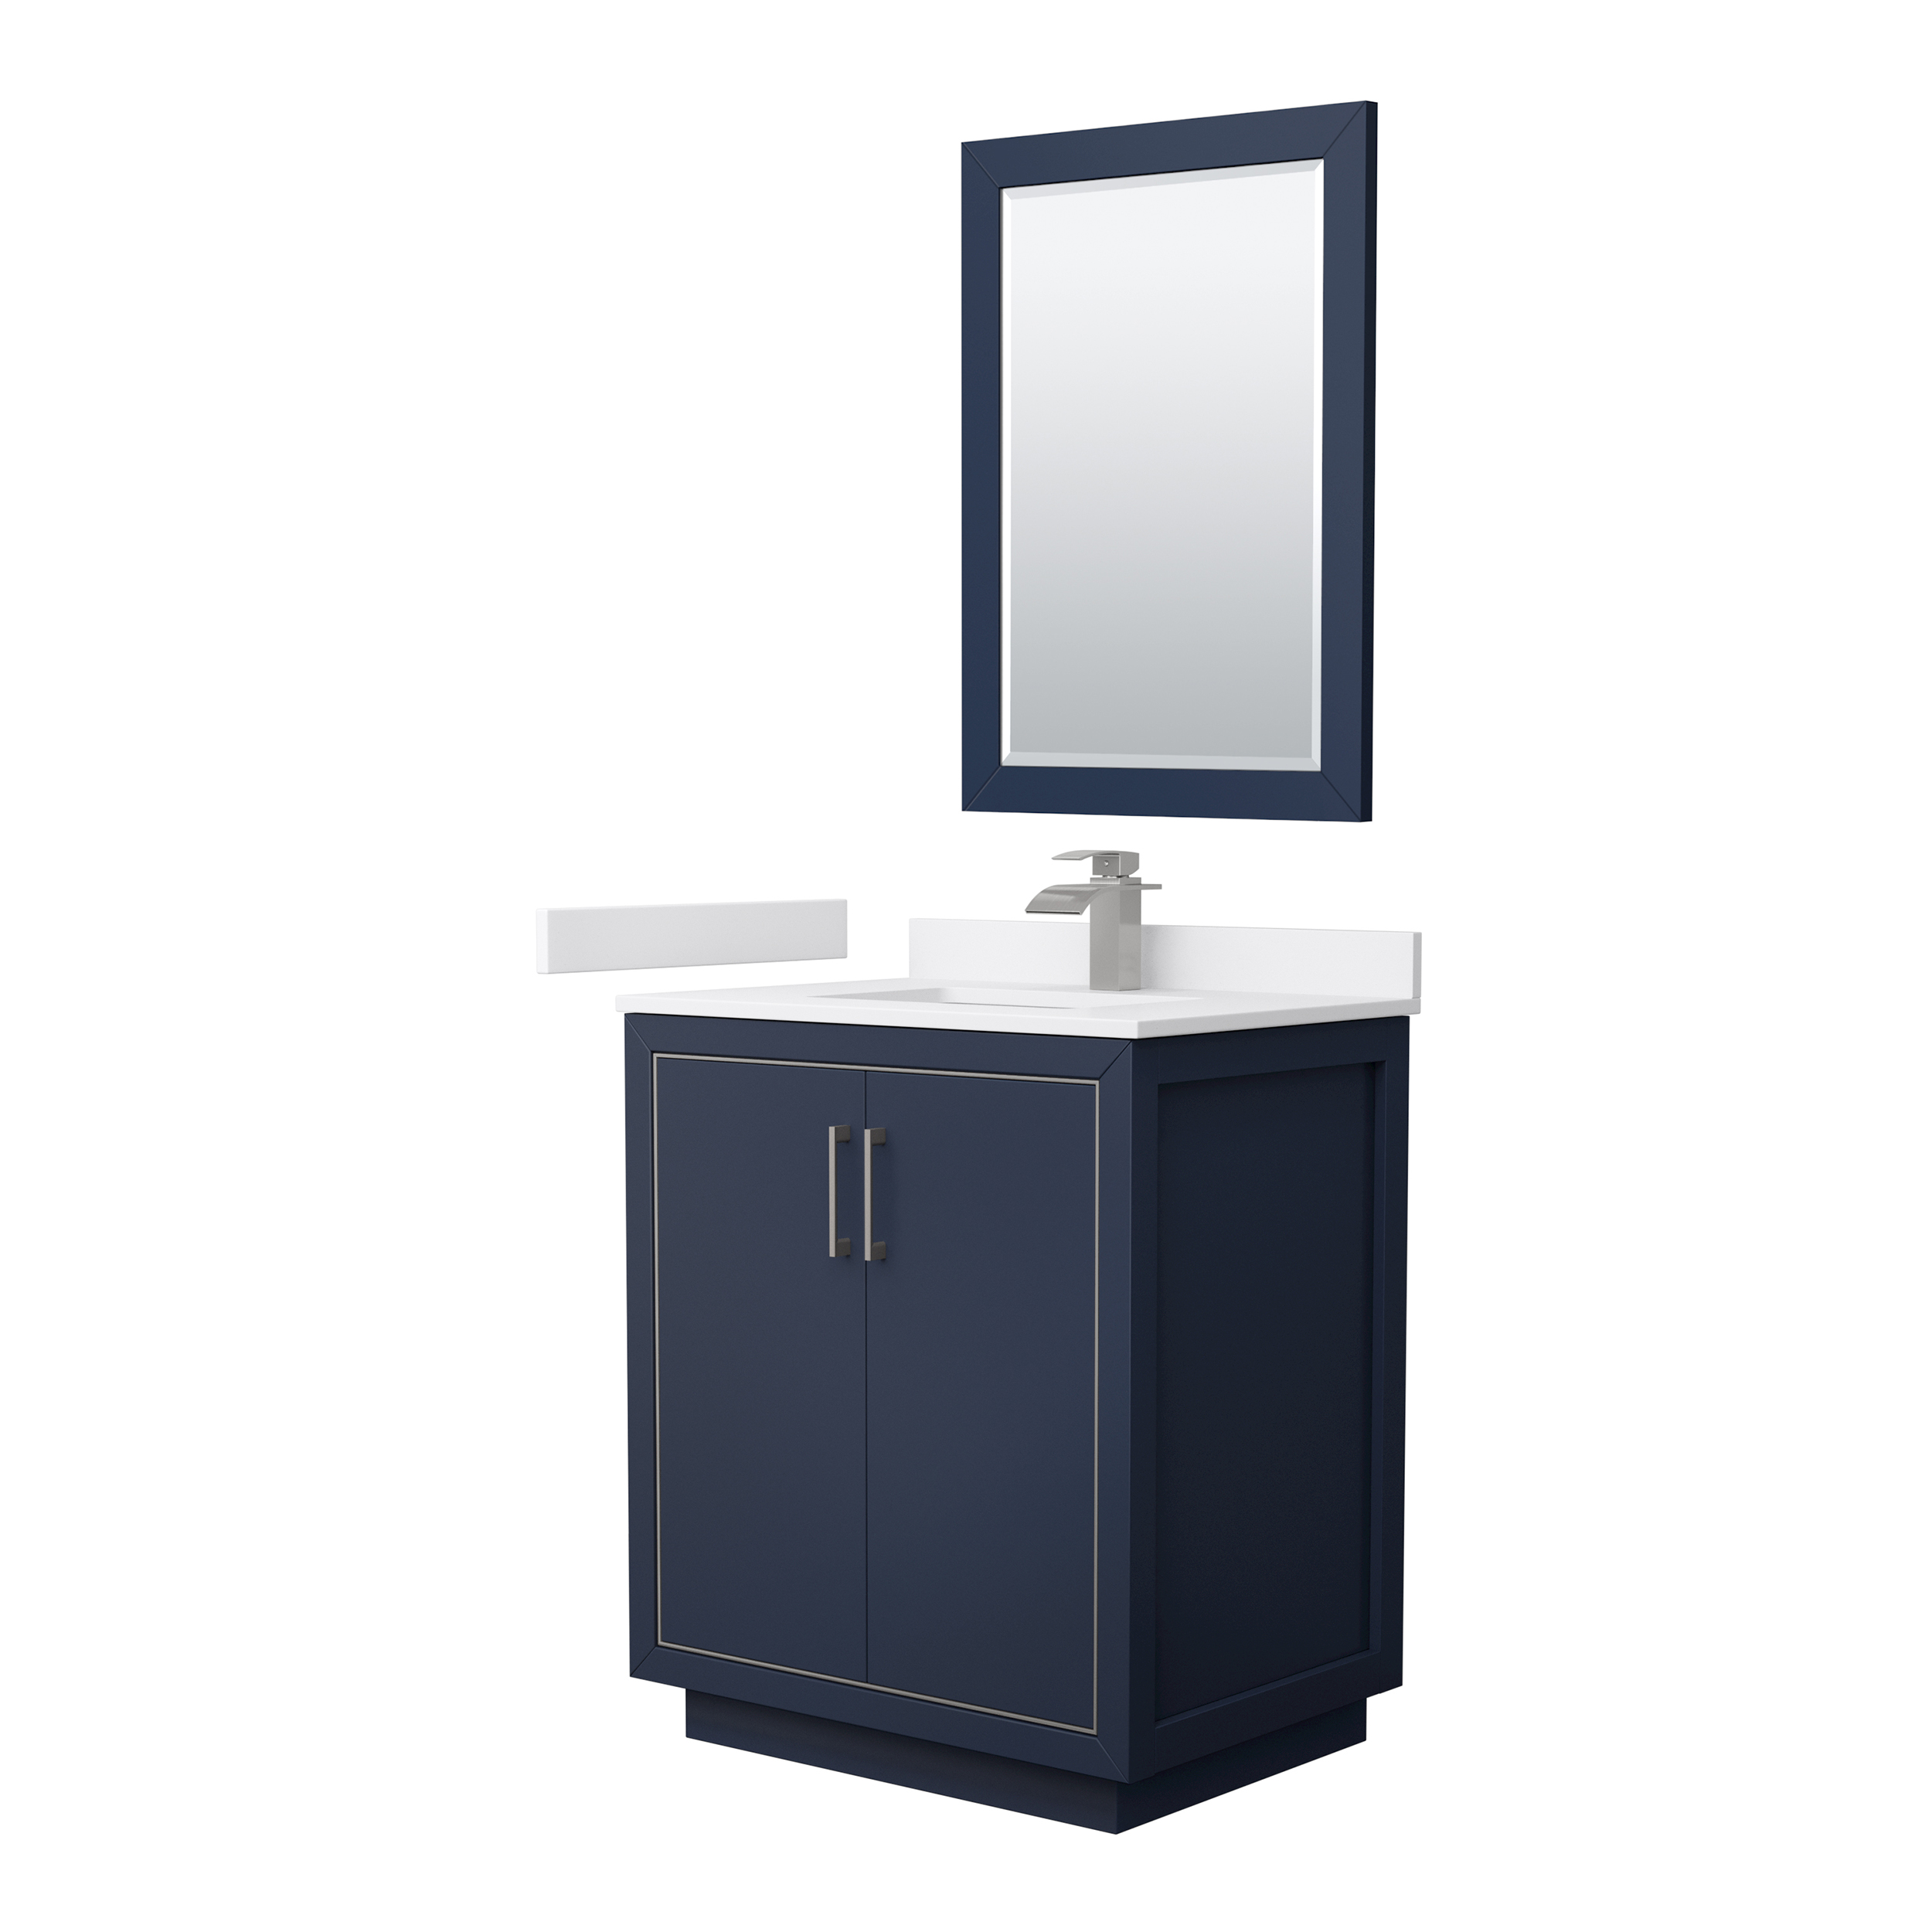 icon 30" single vanity with optional cultured marble counter - dark blue